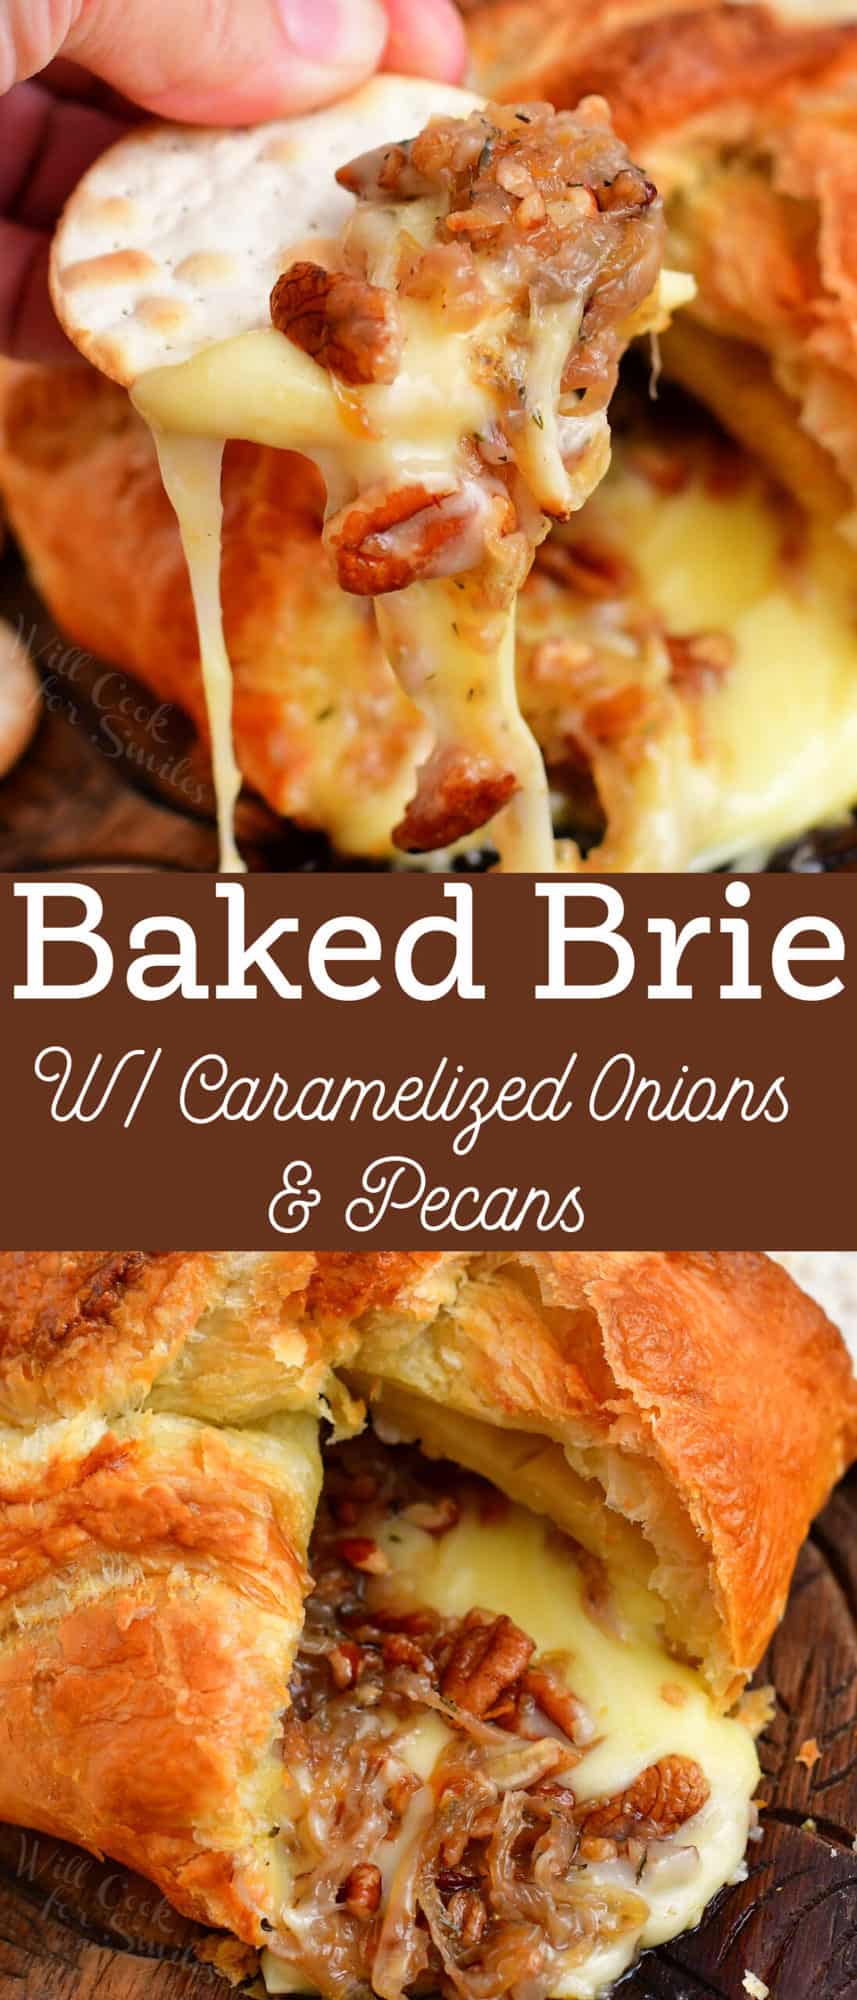 titled image for Pinterest (and shown): Baked Brie with Caramelized Onions and Pecans